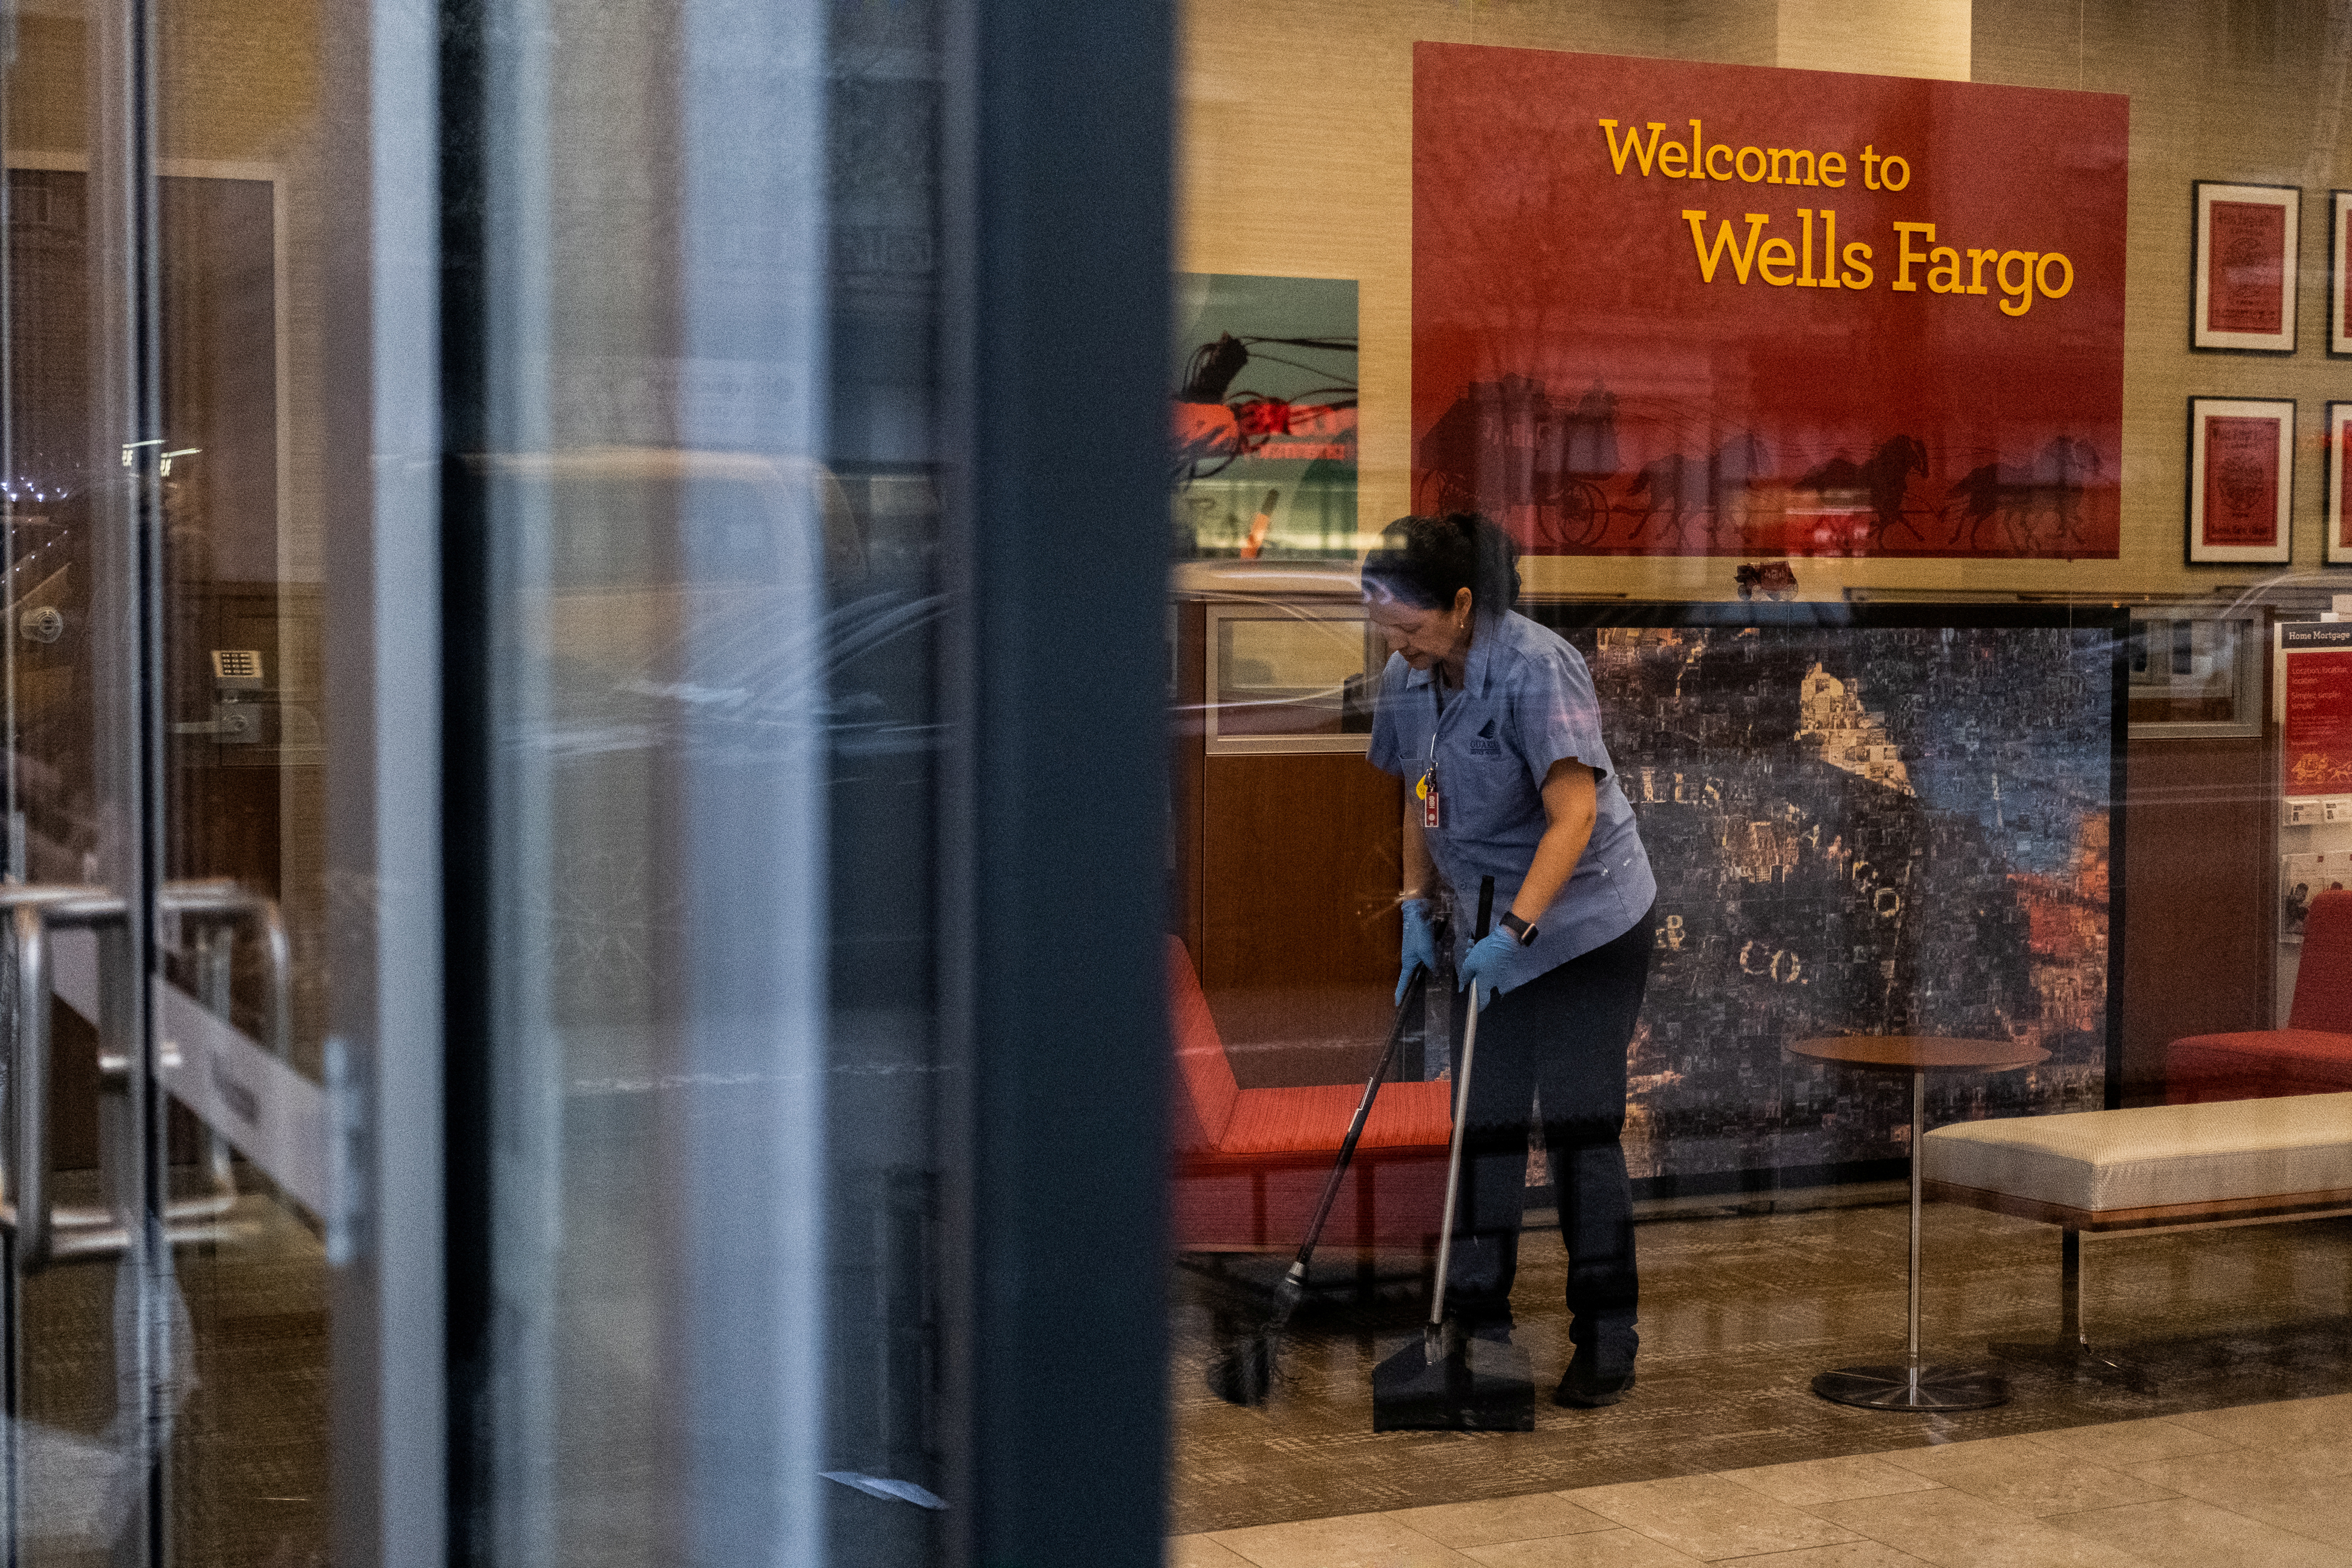 A staff cleans the lobby inside Wells Fargo bank in New York